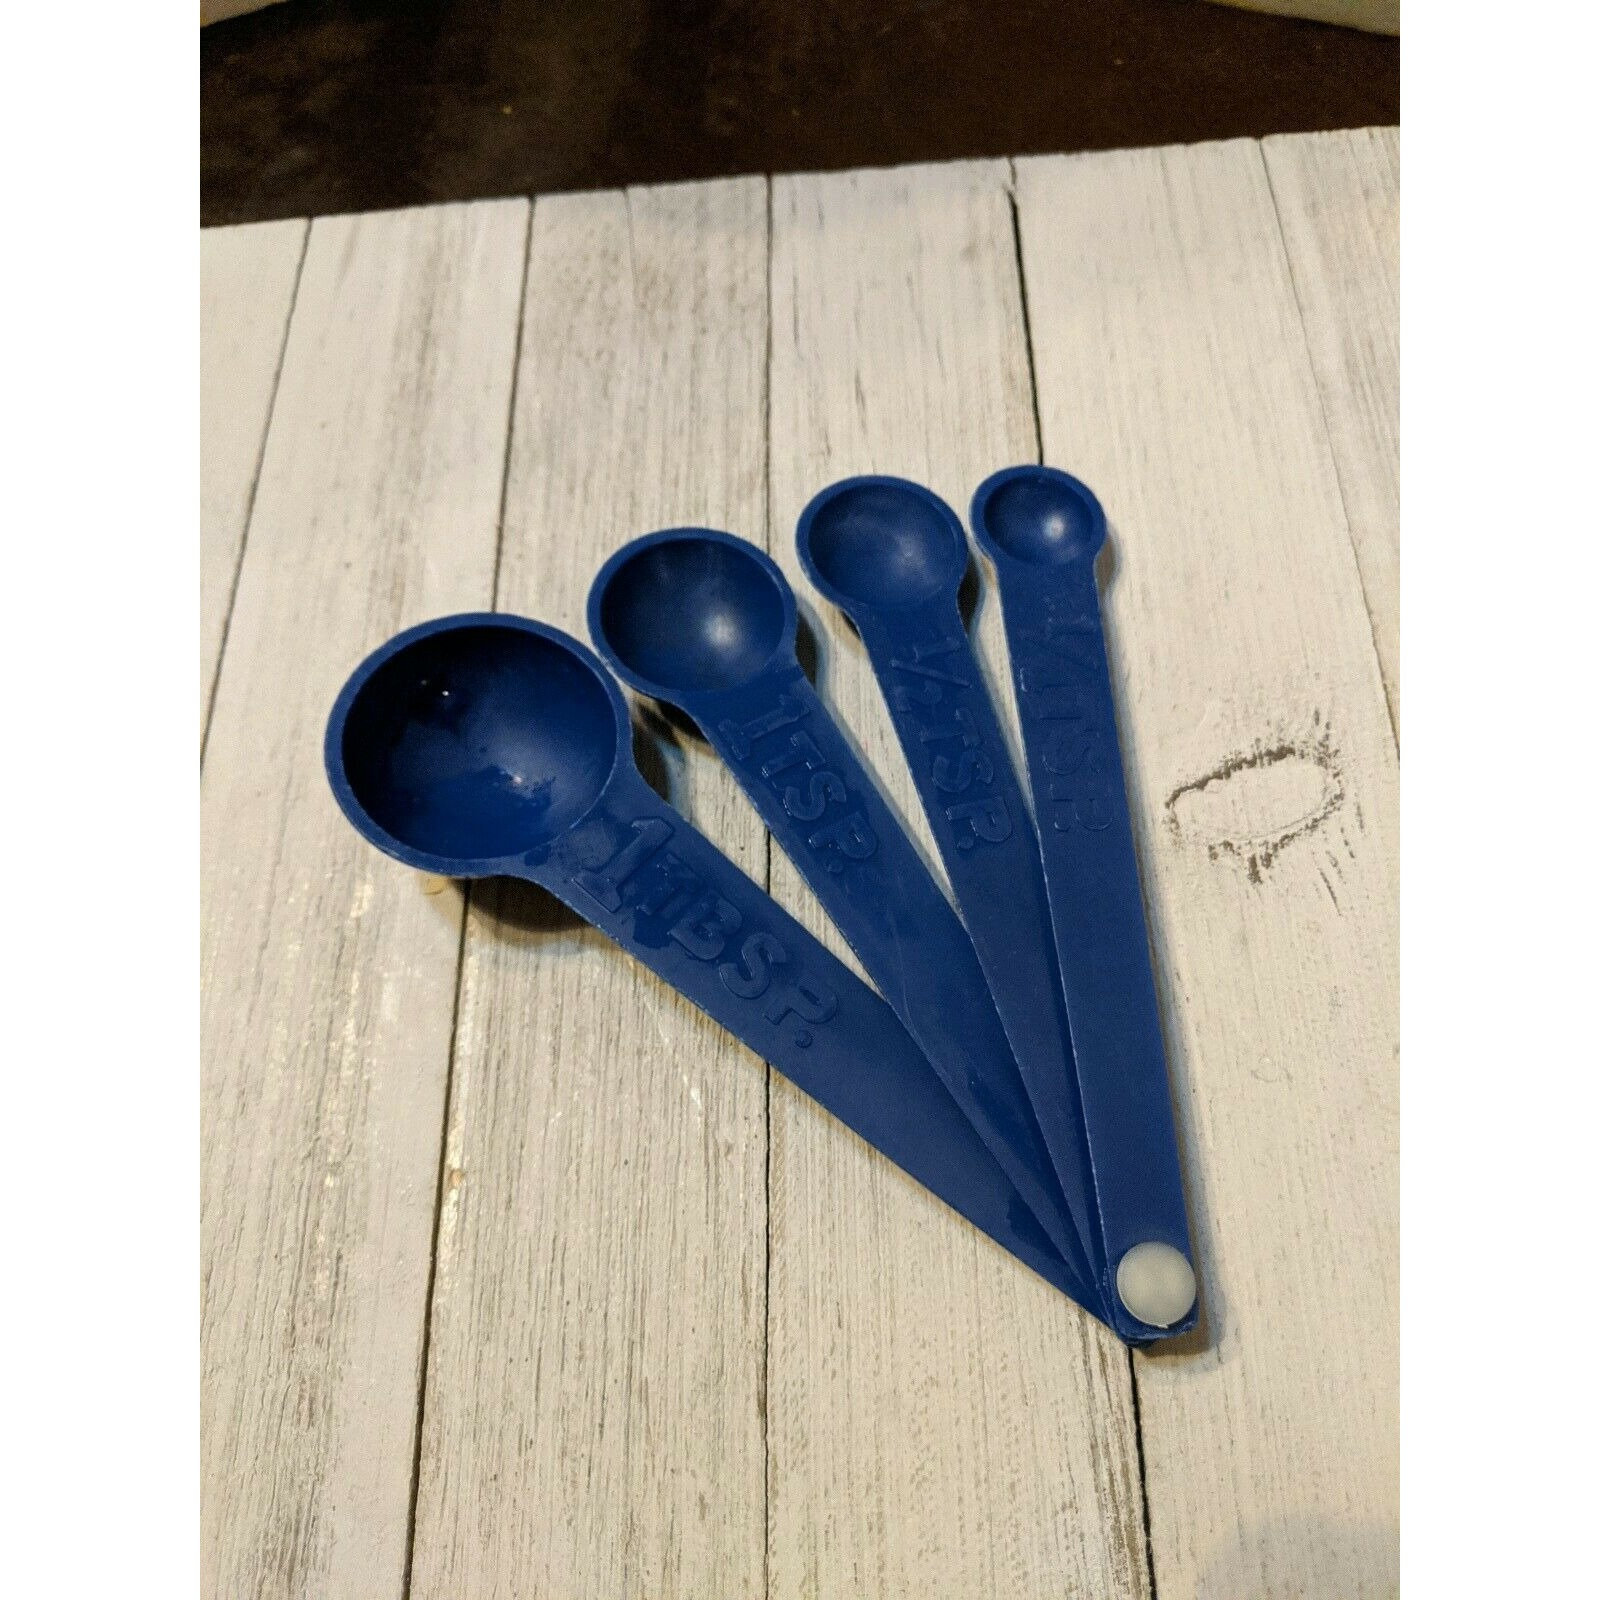 Silicone Collapsible Measuring Cups & Measuring Spoons 8-piece Set